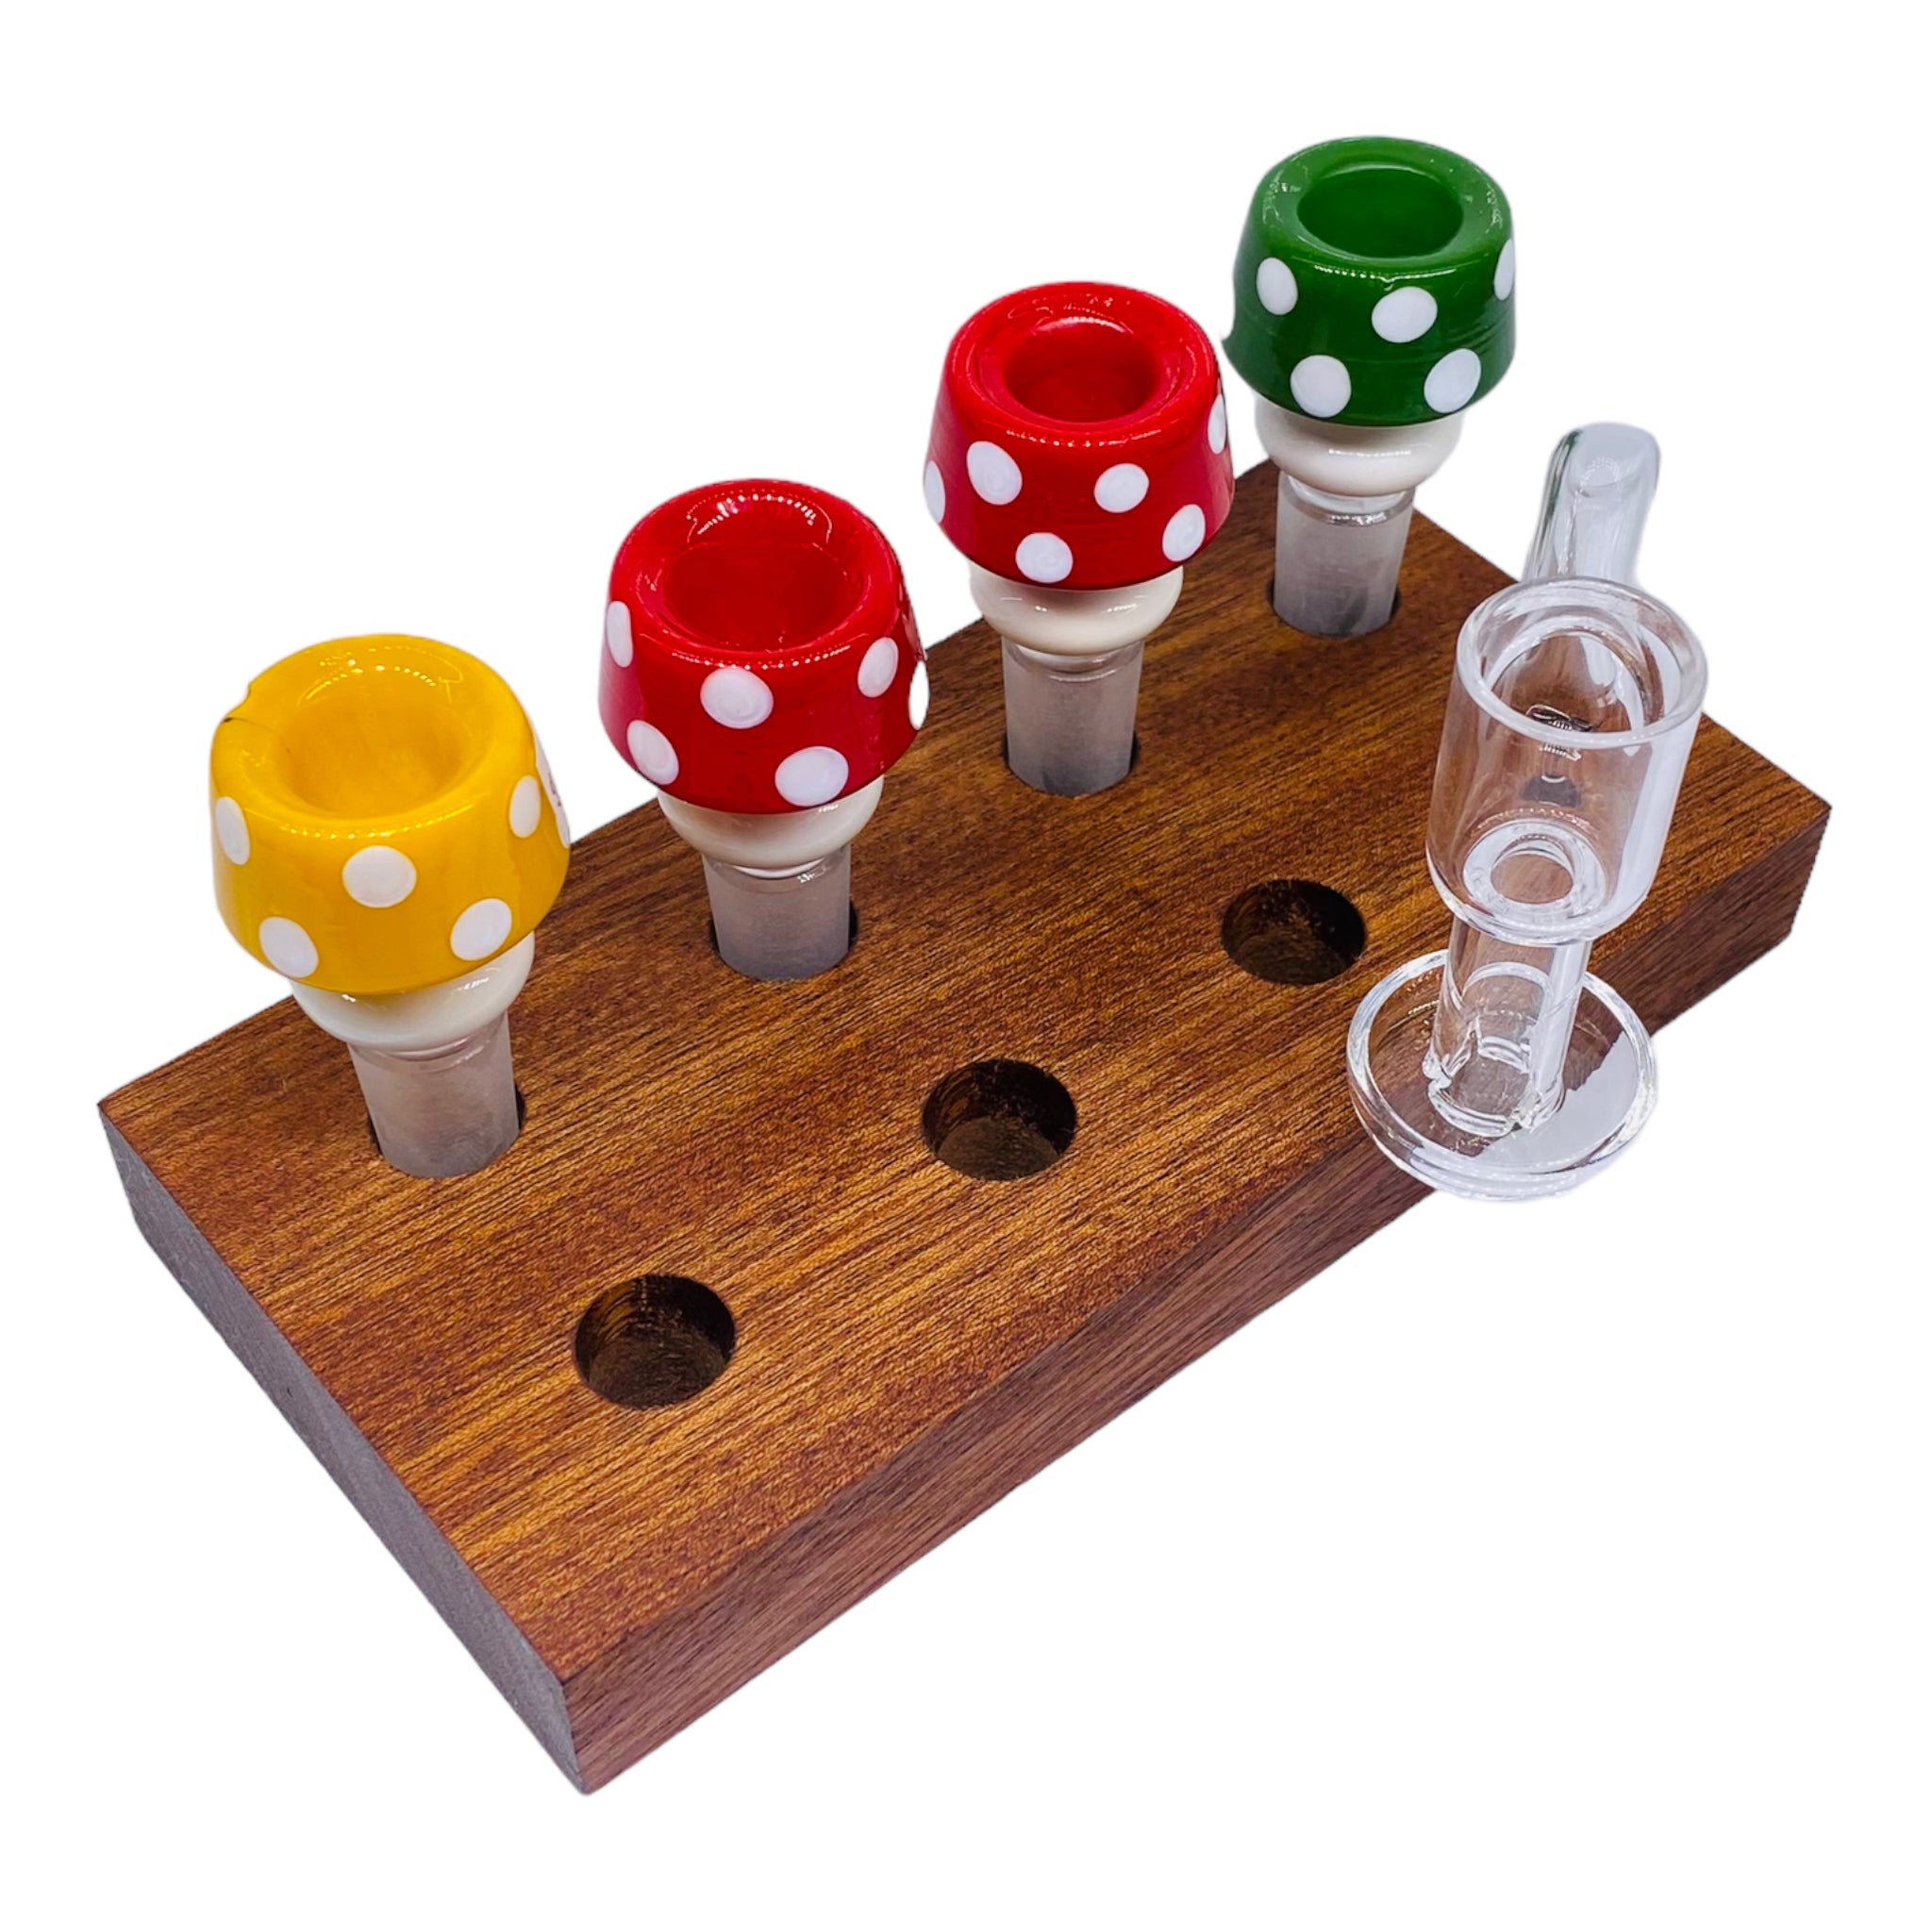 8 Hole Wood Display Stand Holder For 14mm Bong Bowl Pieces Or Quartz Bangers - Mahogany